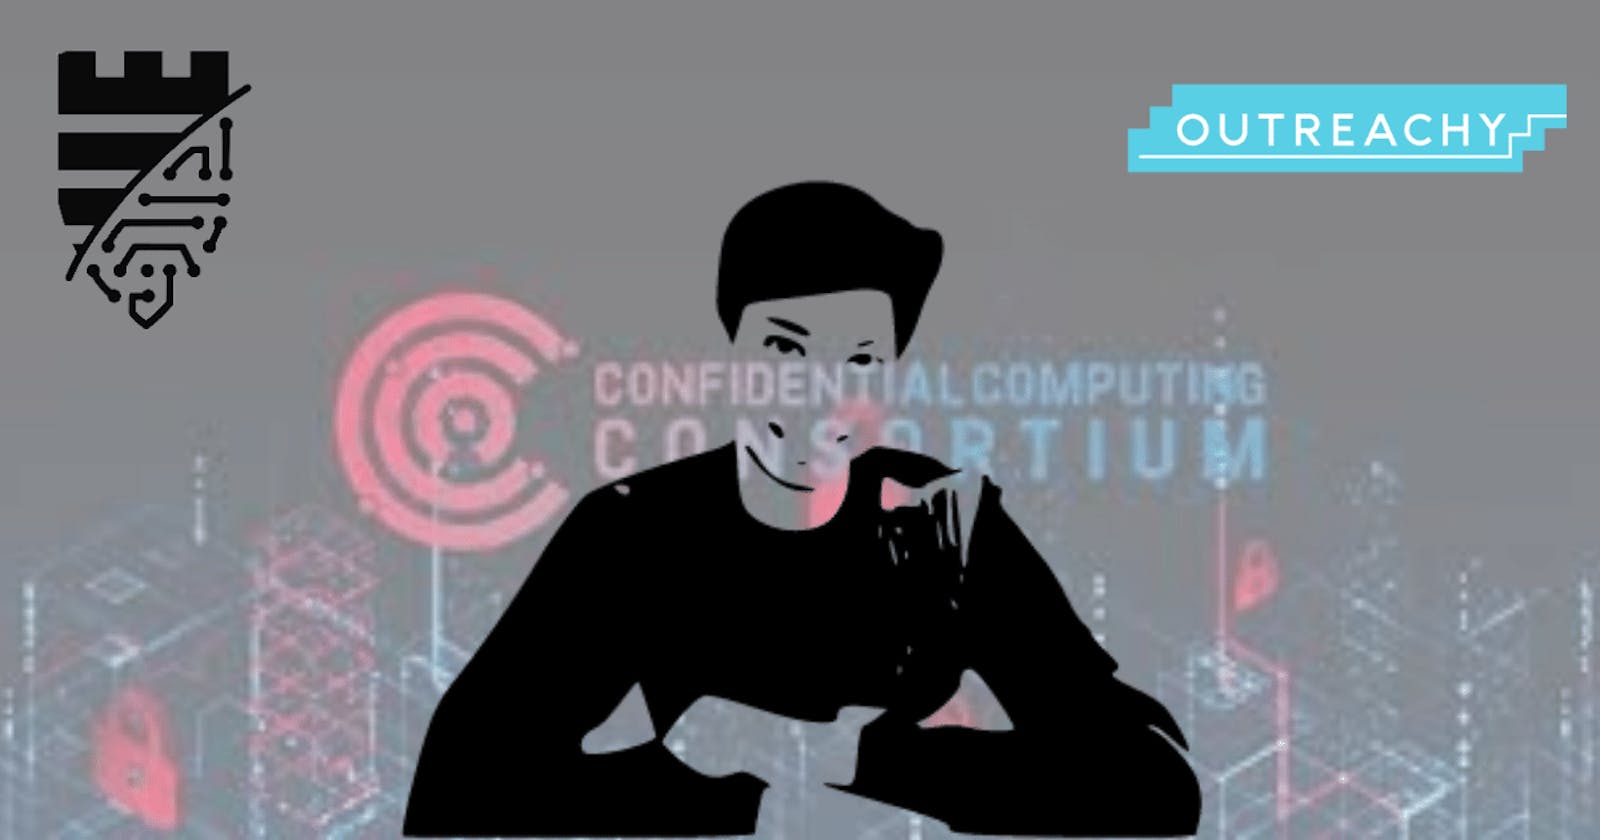 Ajay's Journey as an Outreachy intern in Confidential Computing Consortium's Enarx